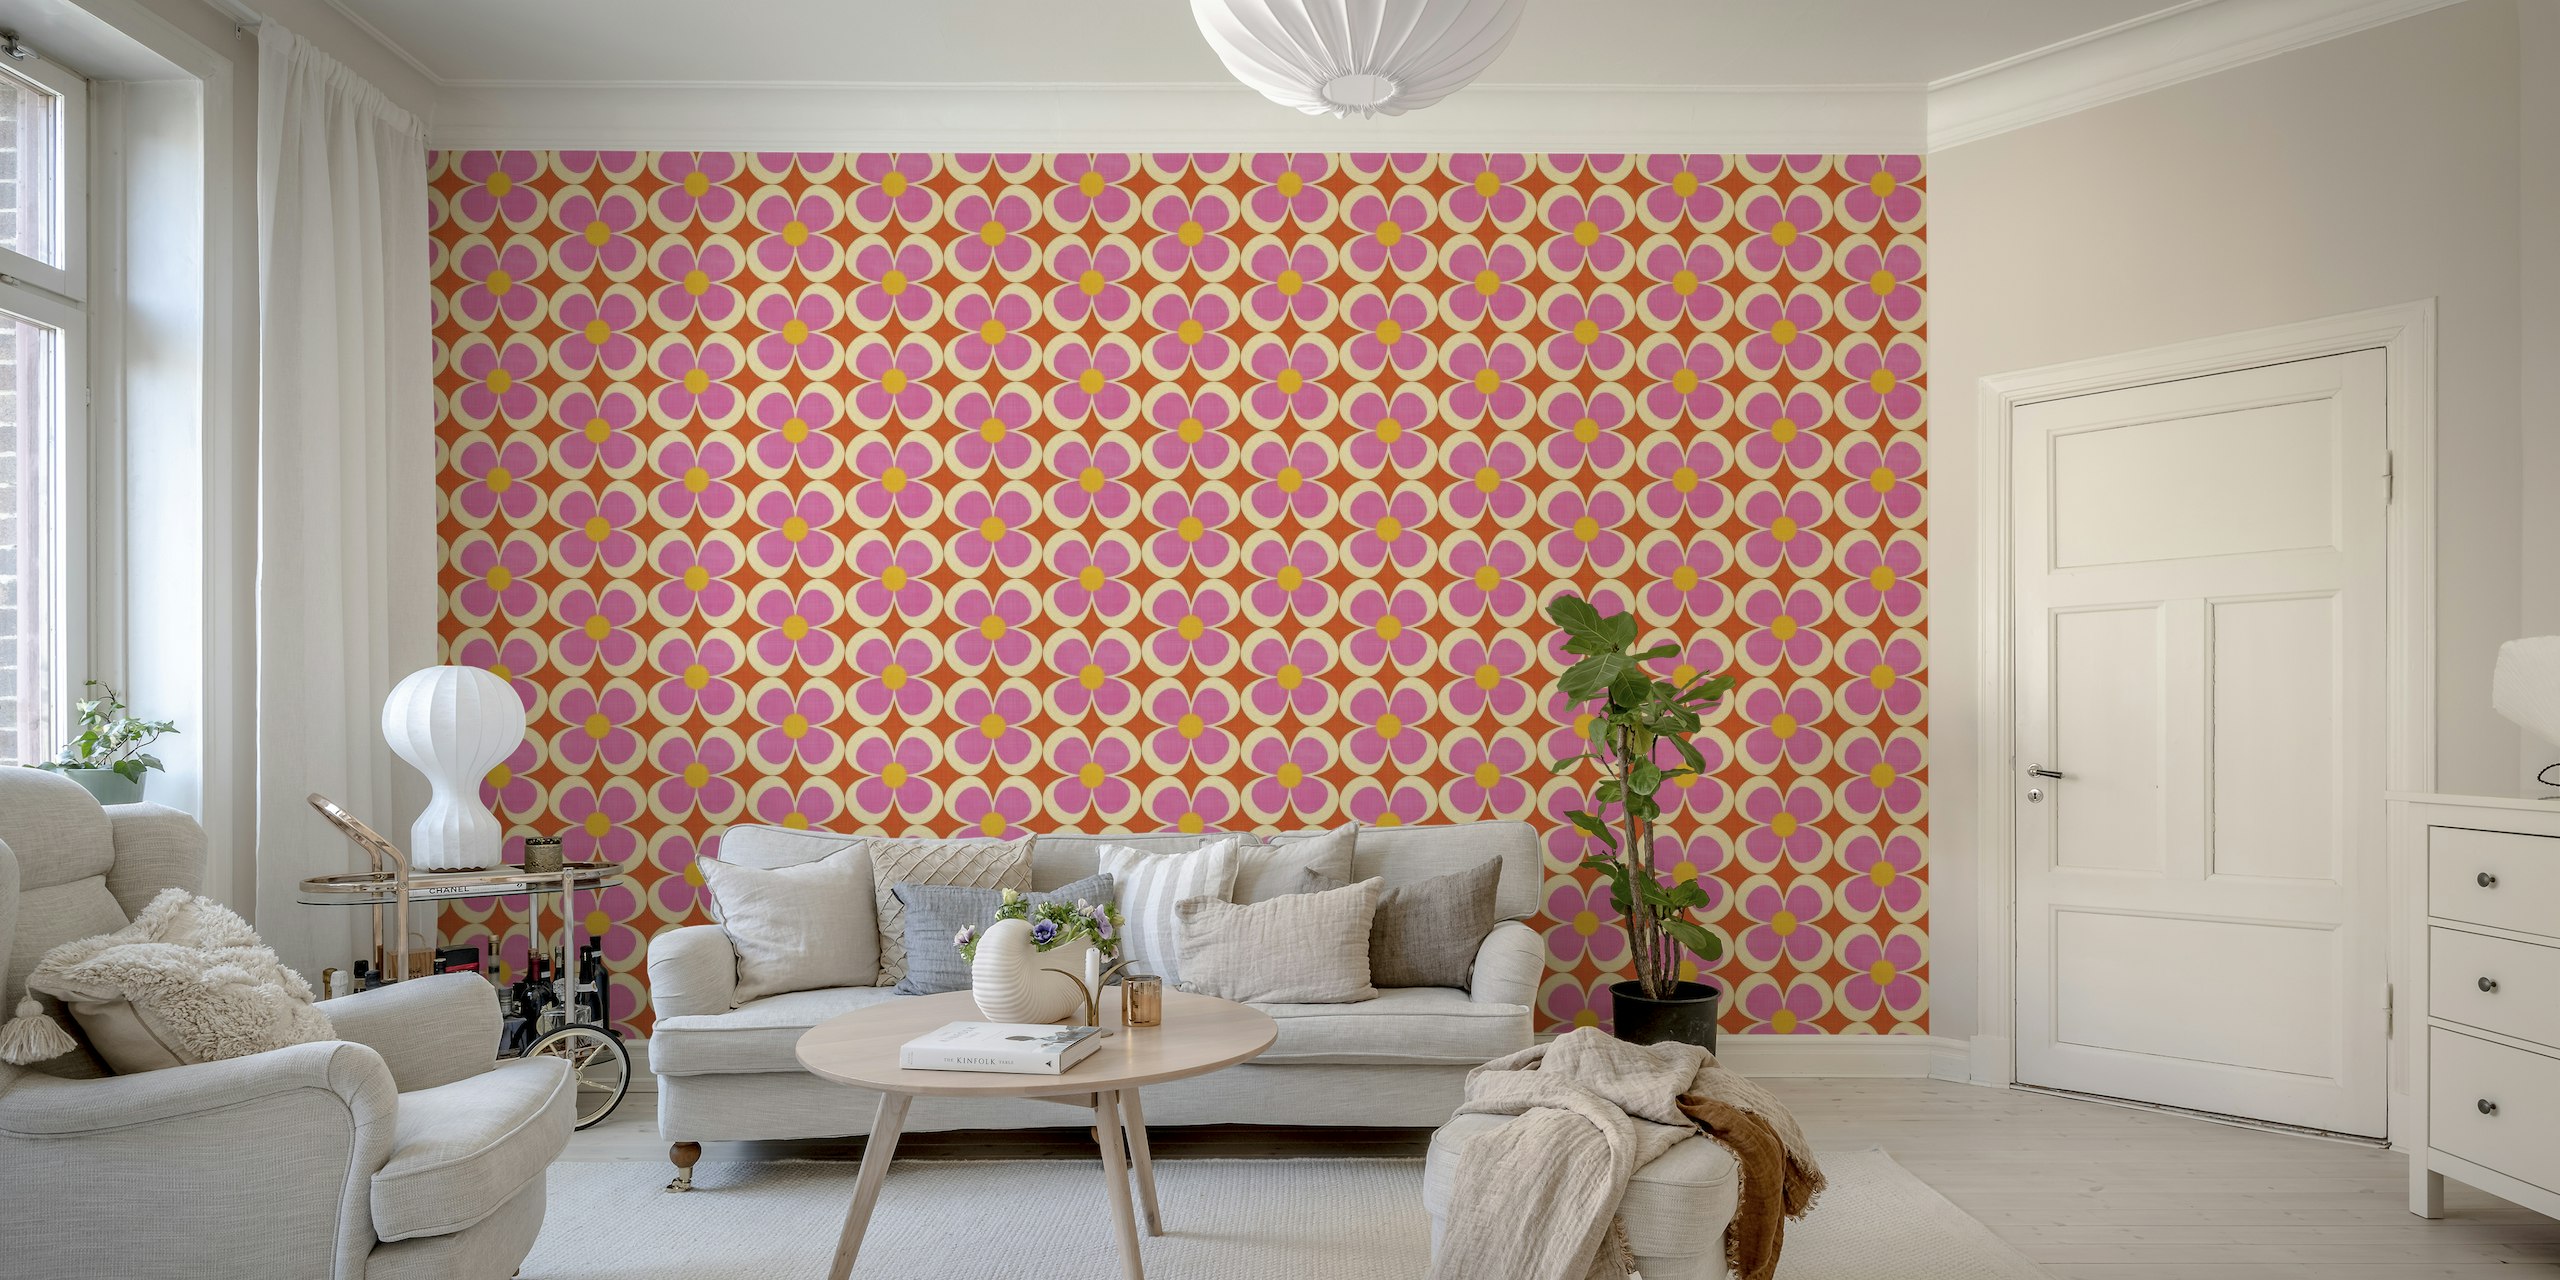 Groovy Geometric Floral Pink Orange Red Small ταπετσαρία